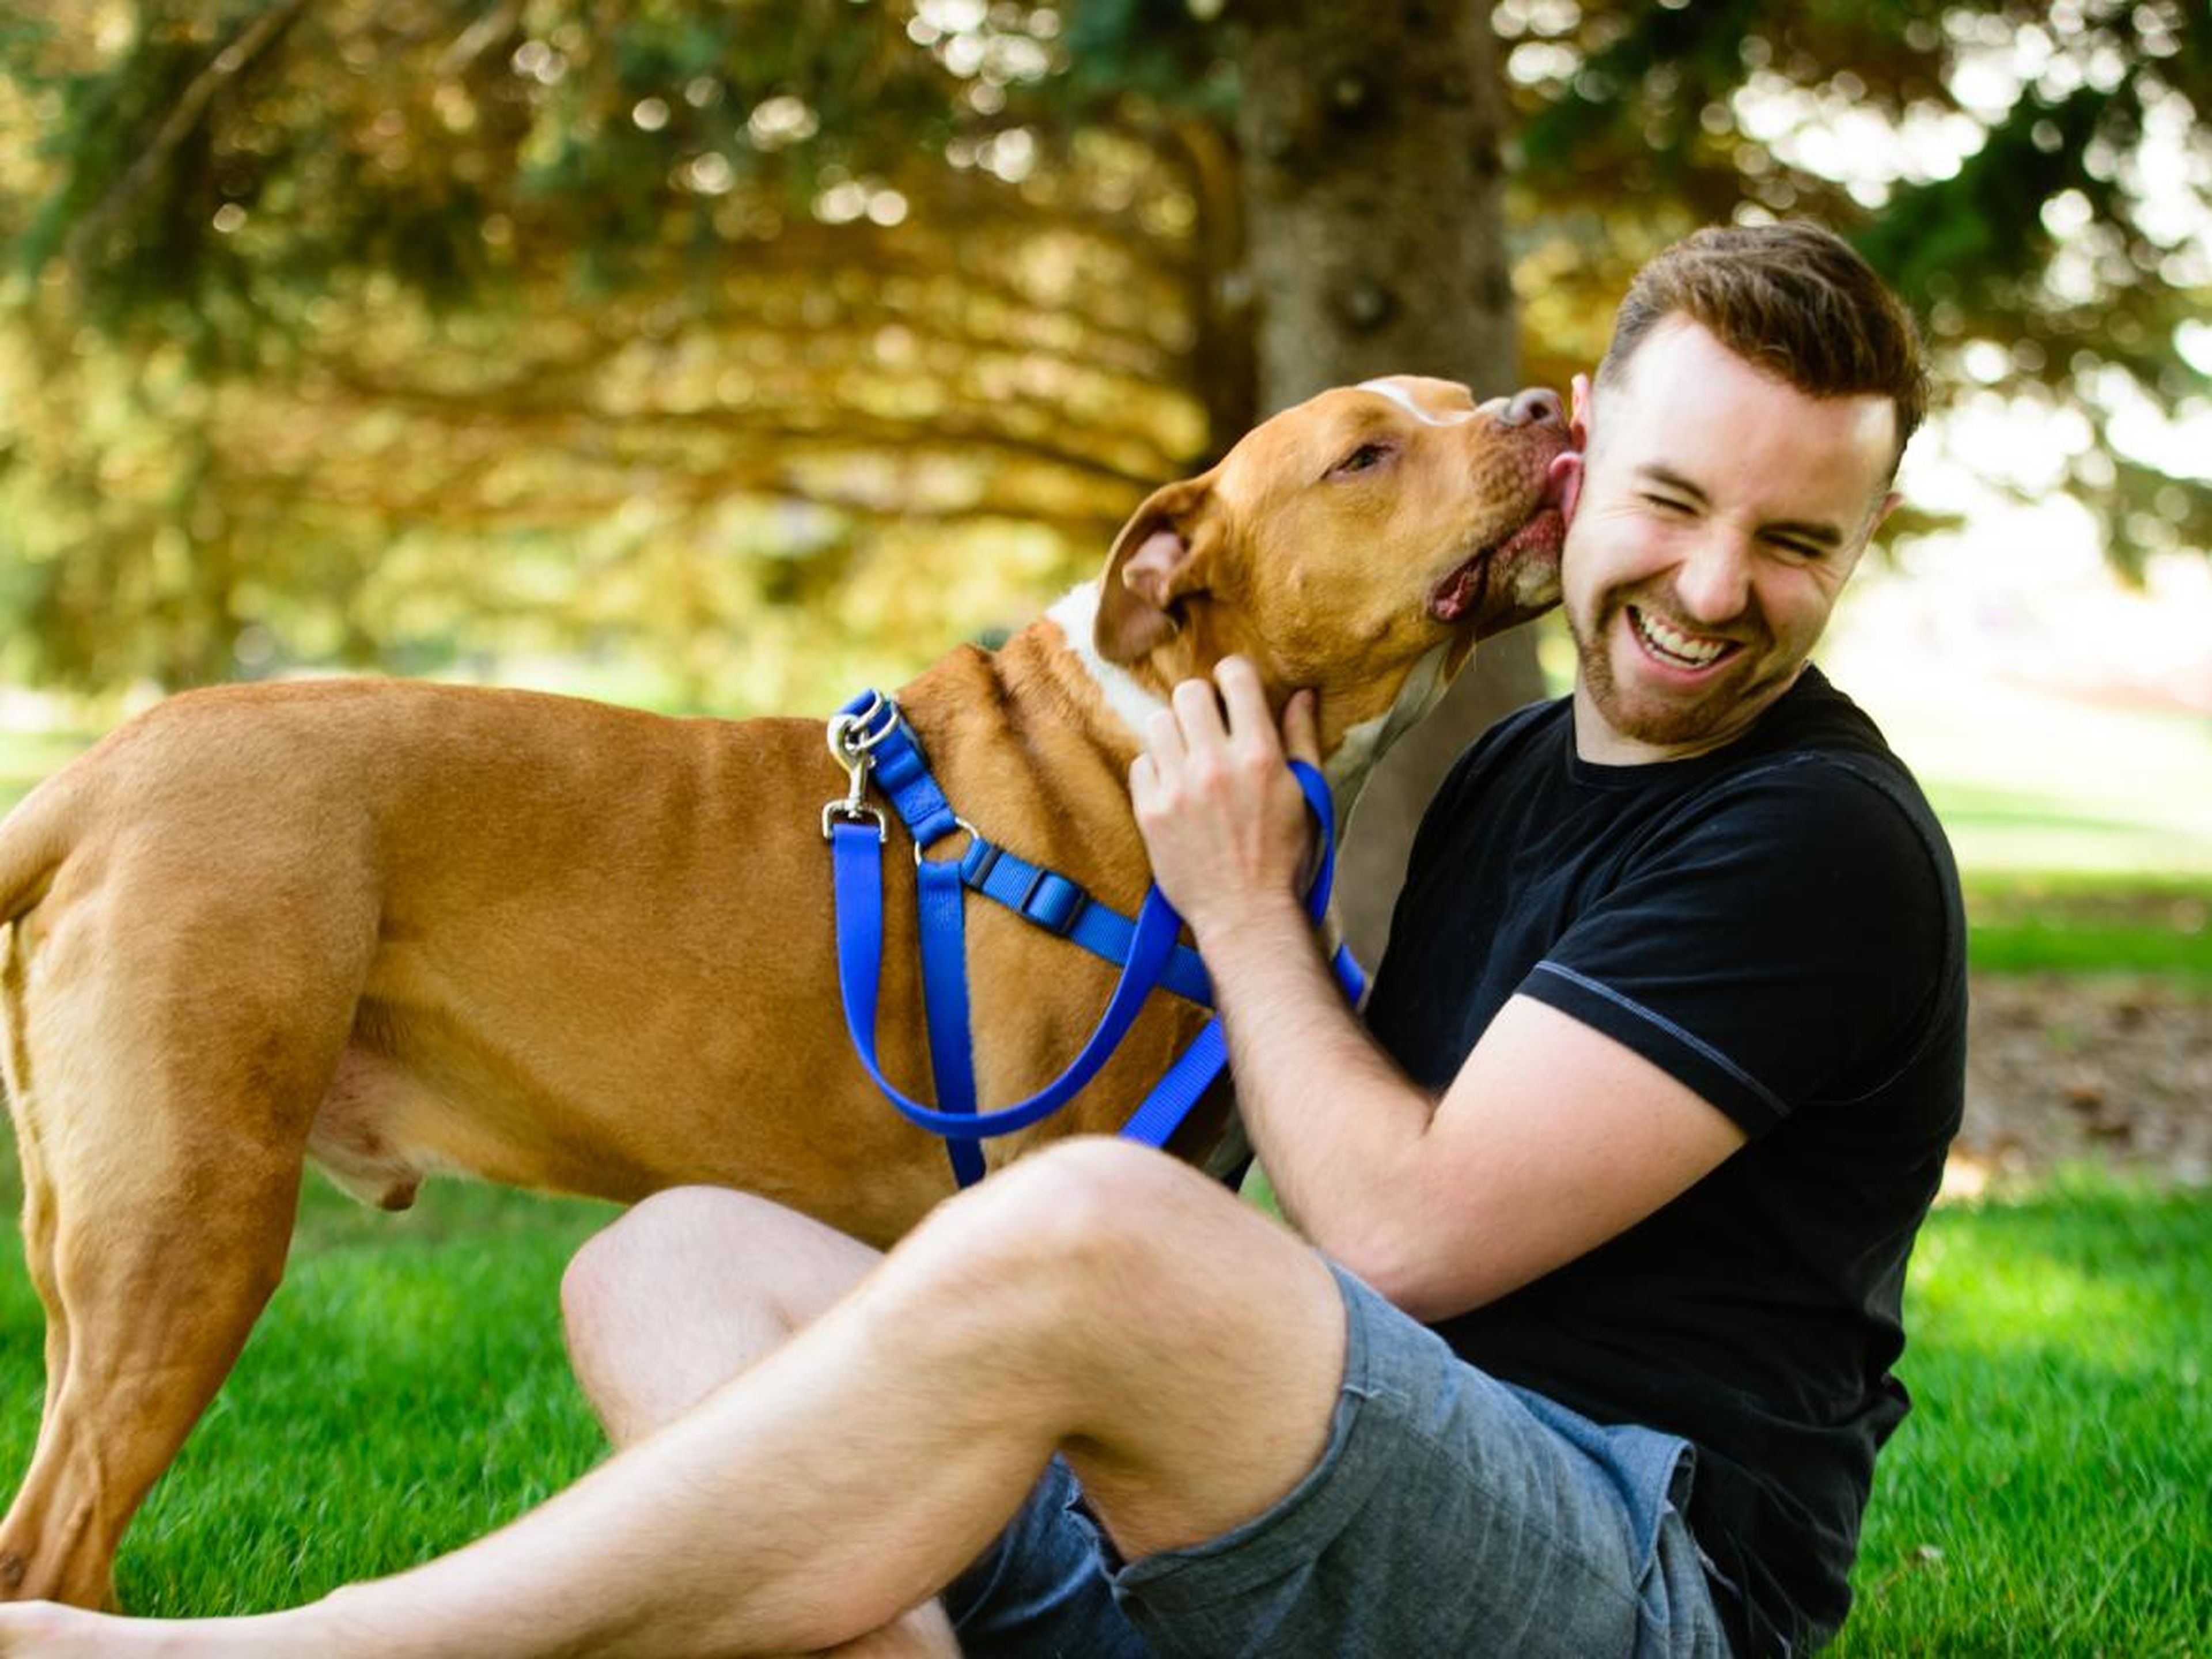 Get a pet. Being a dog owner may signal that a man is nurturing and capable of making long-term commitments. It can also make someone appear more approachable.